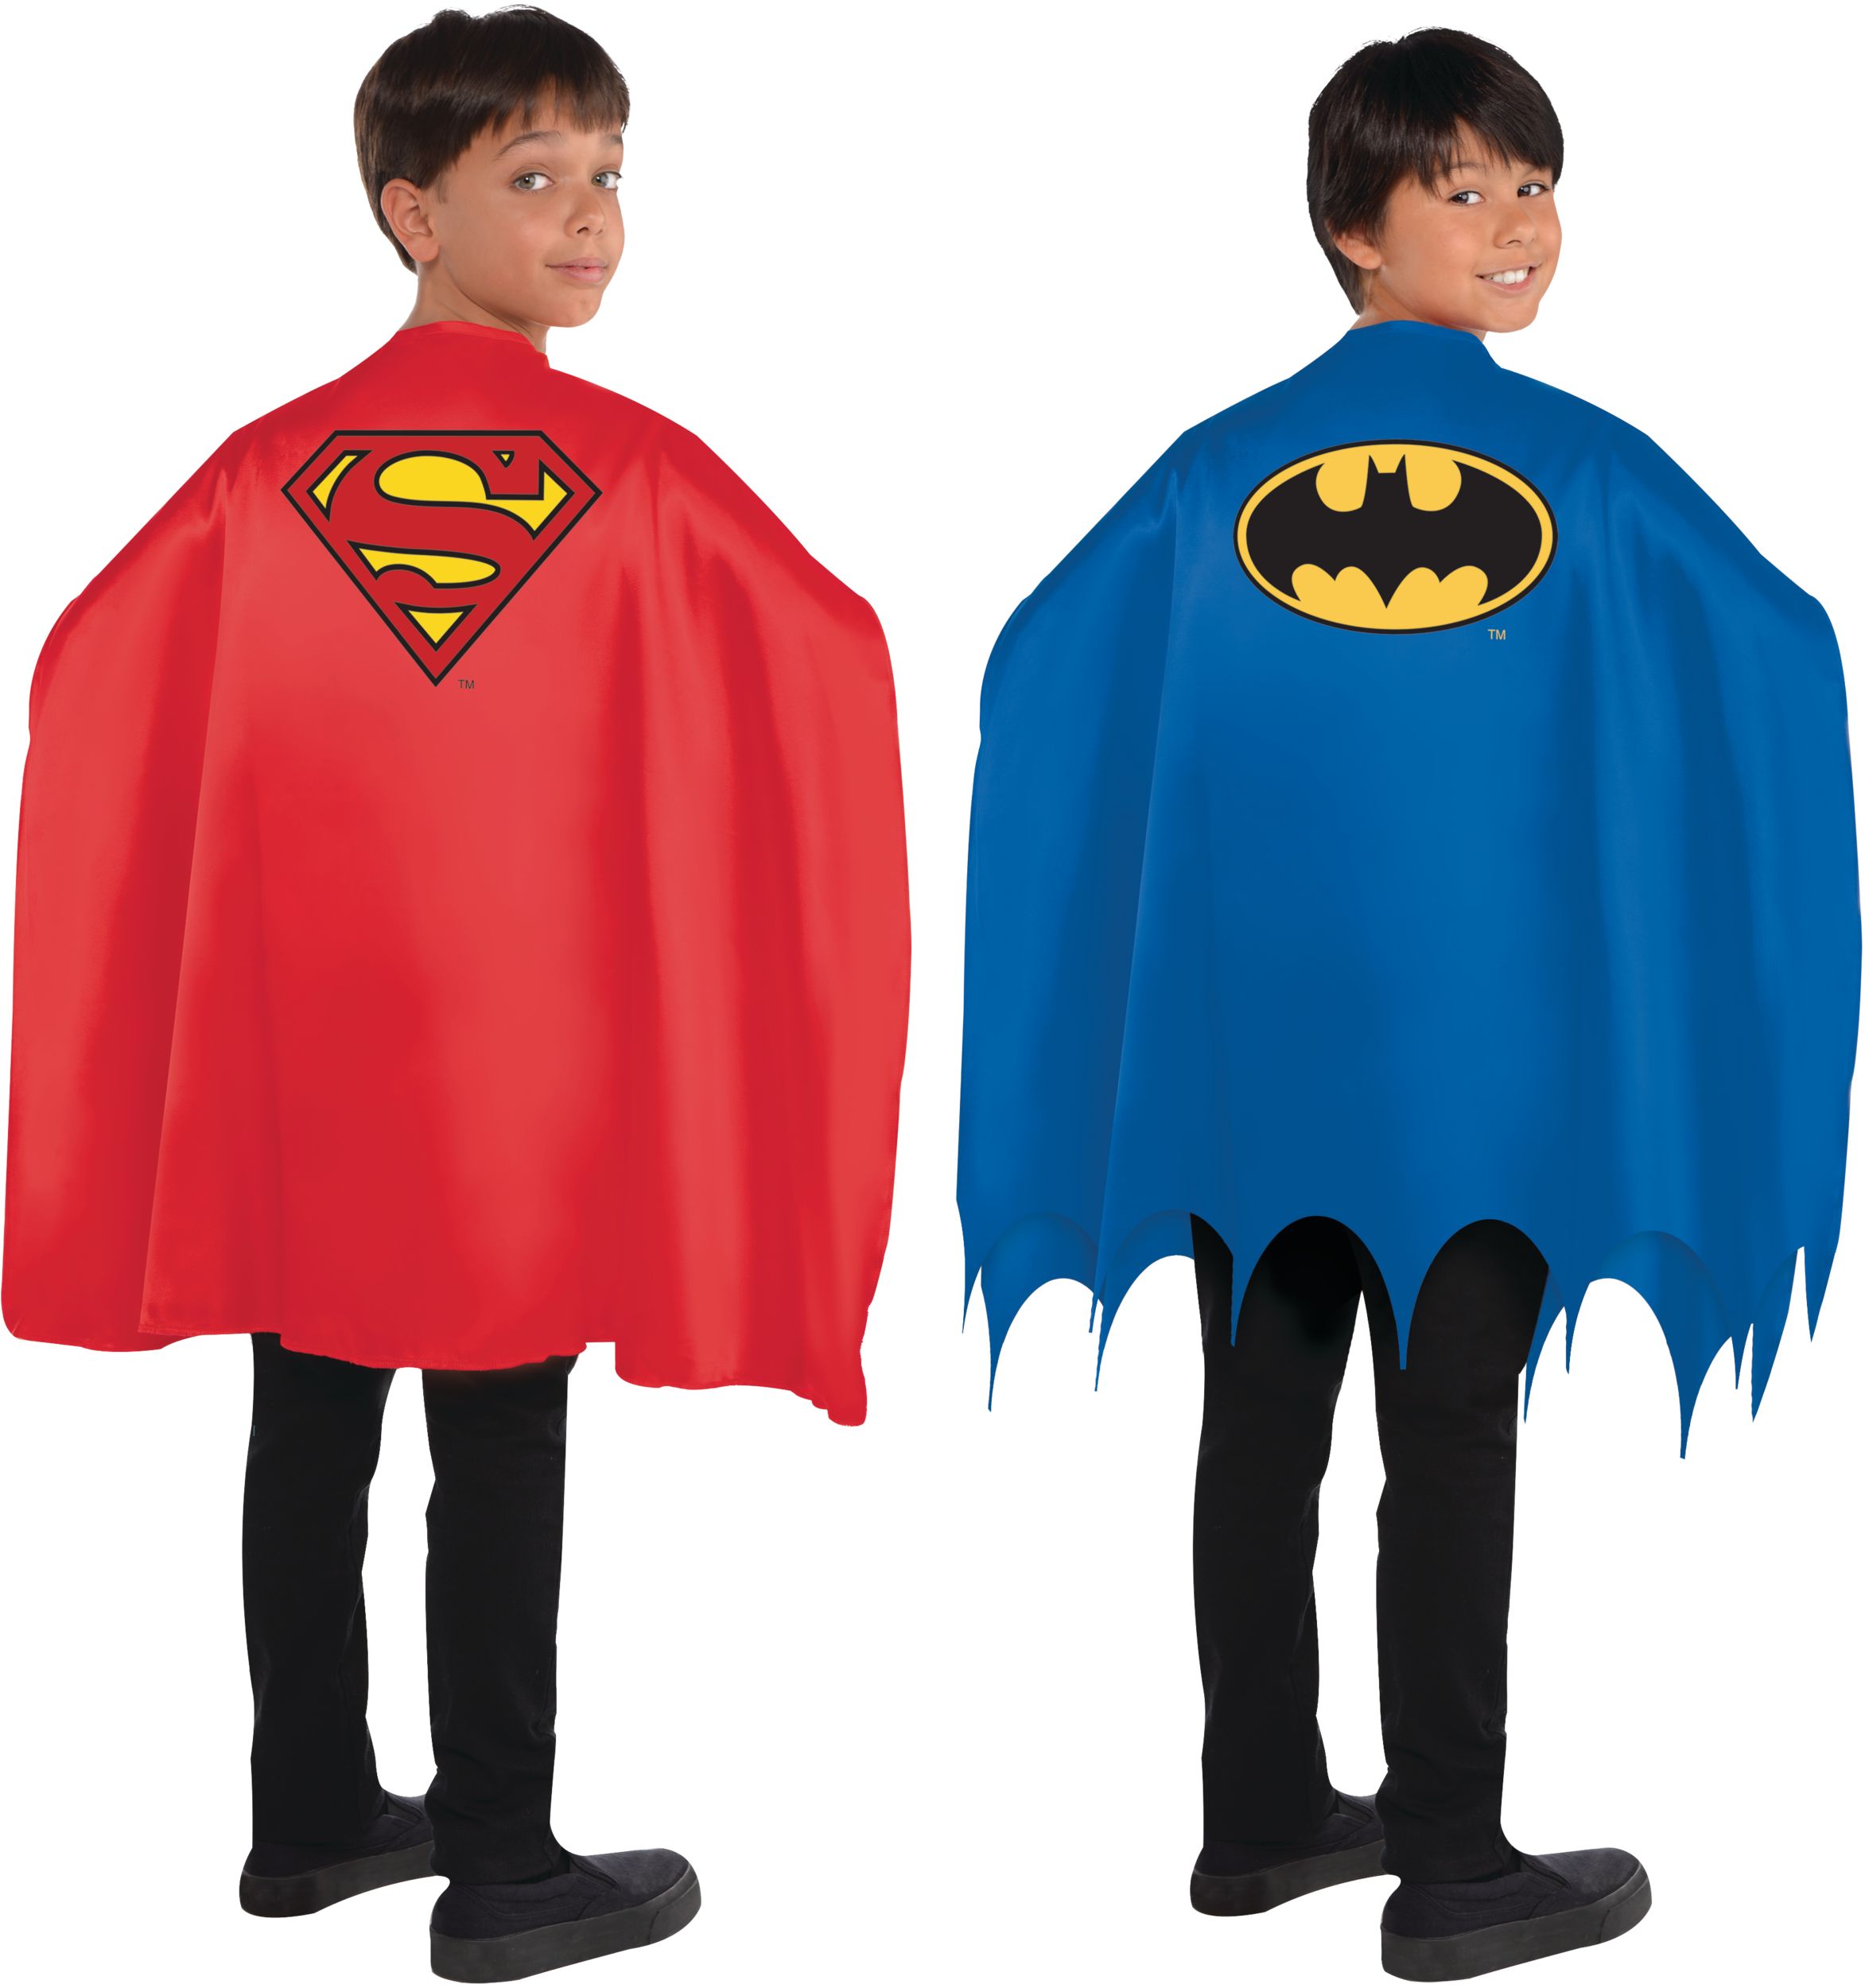 Kids' DC Justice League & Superman Capes, One Size, 2-pk, Wearable Costume Accessories for Halloween | City